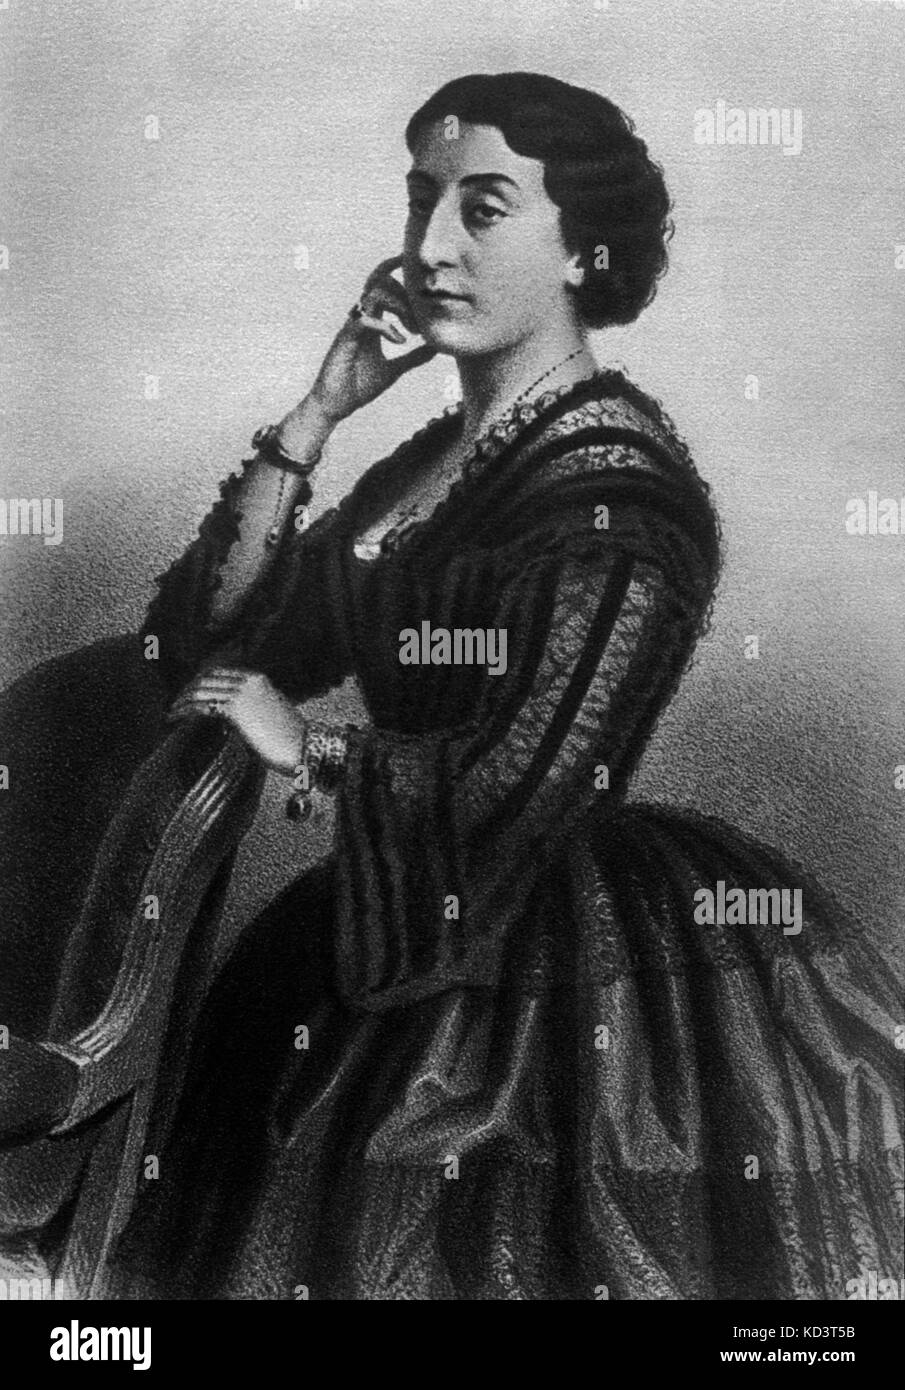 Erminia Frezzolini - portrait of the Italian soprano. Standing, leaning on a chair. EF: 27 March 1818 - 5 November 1884. Sang in the first performances of Verdi 's I Lombardi and Giovanna d'Arco. Stock Photo